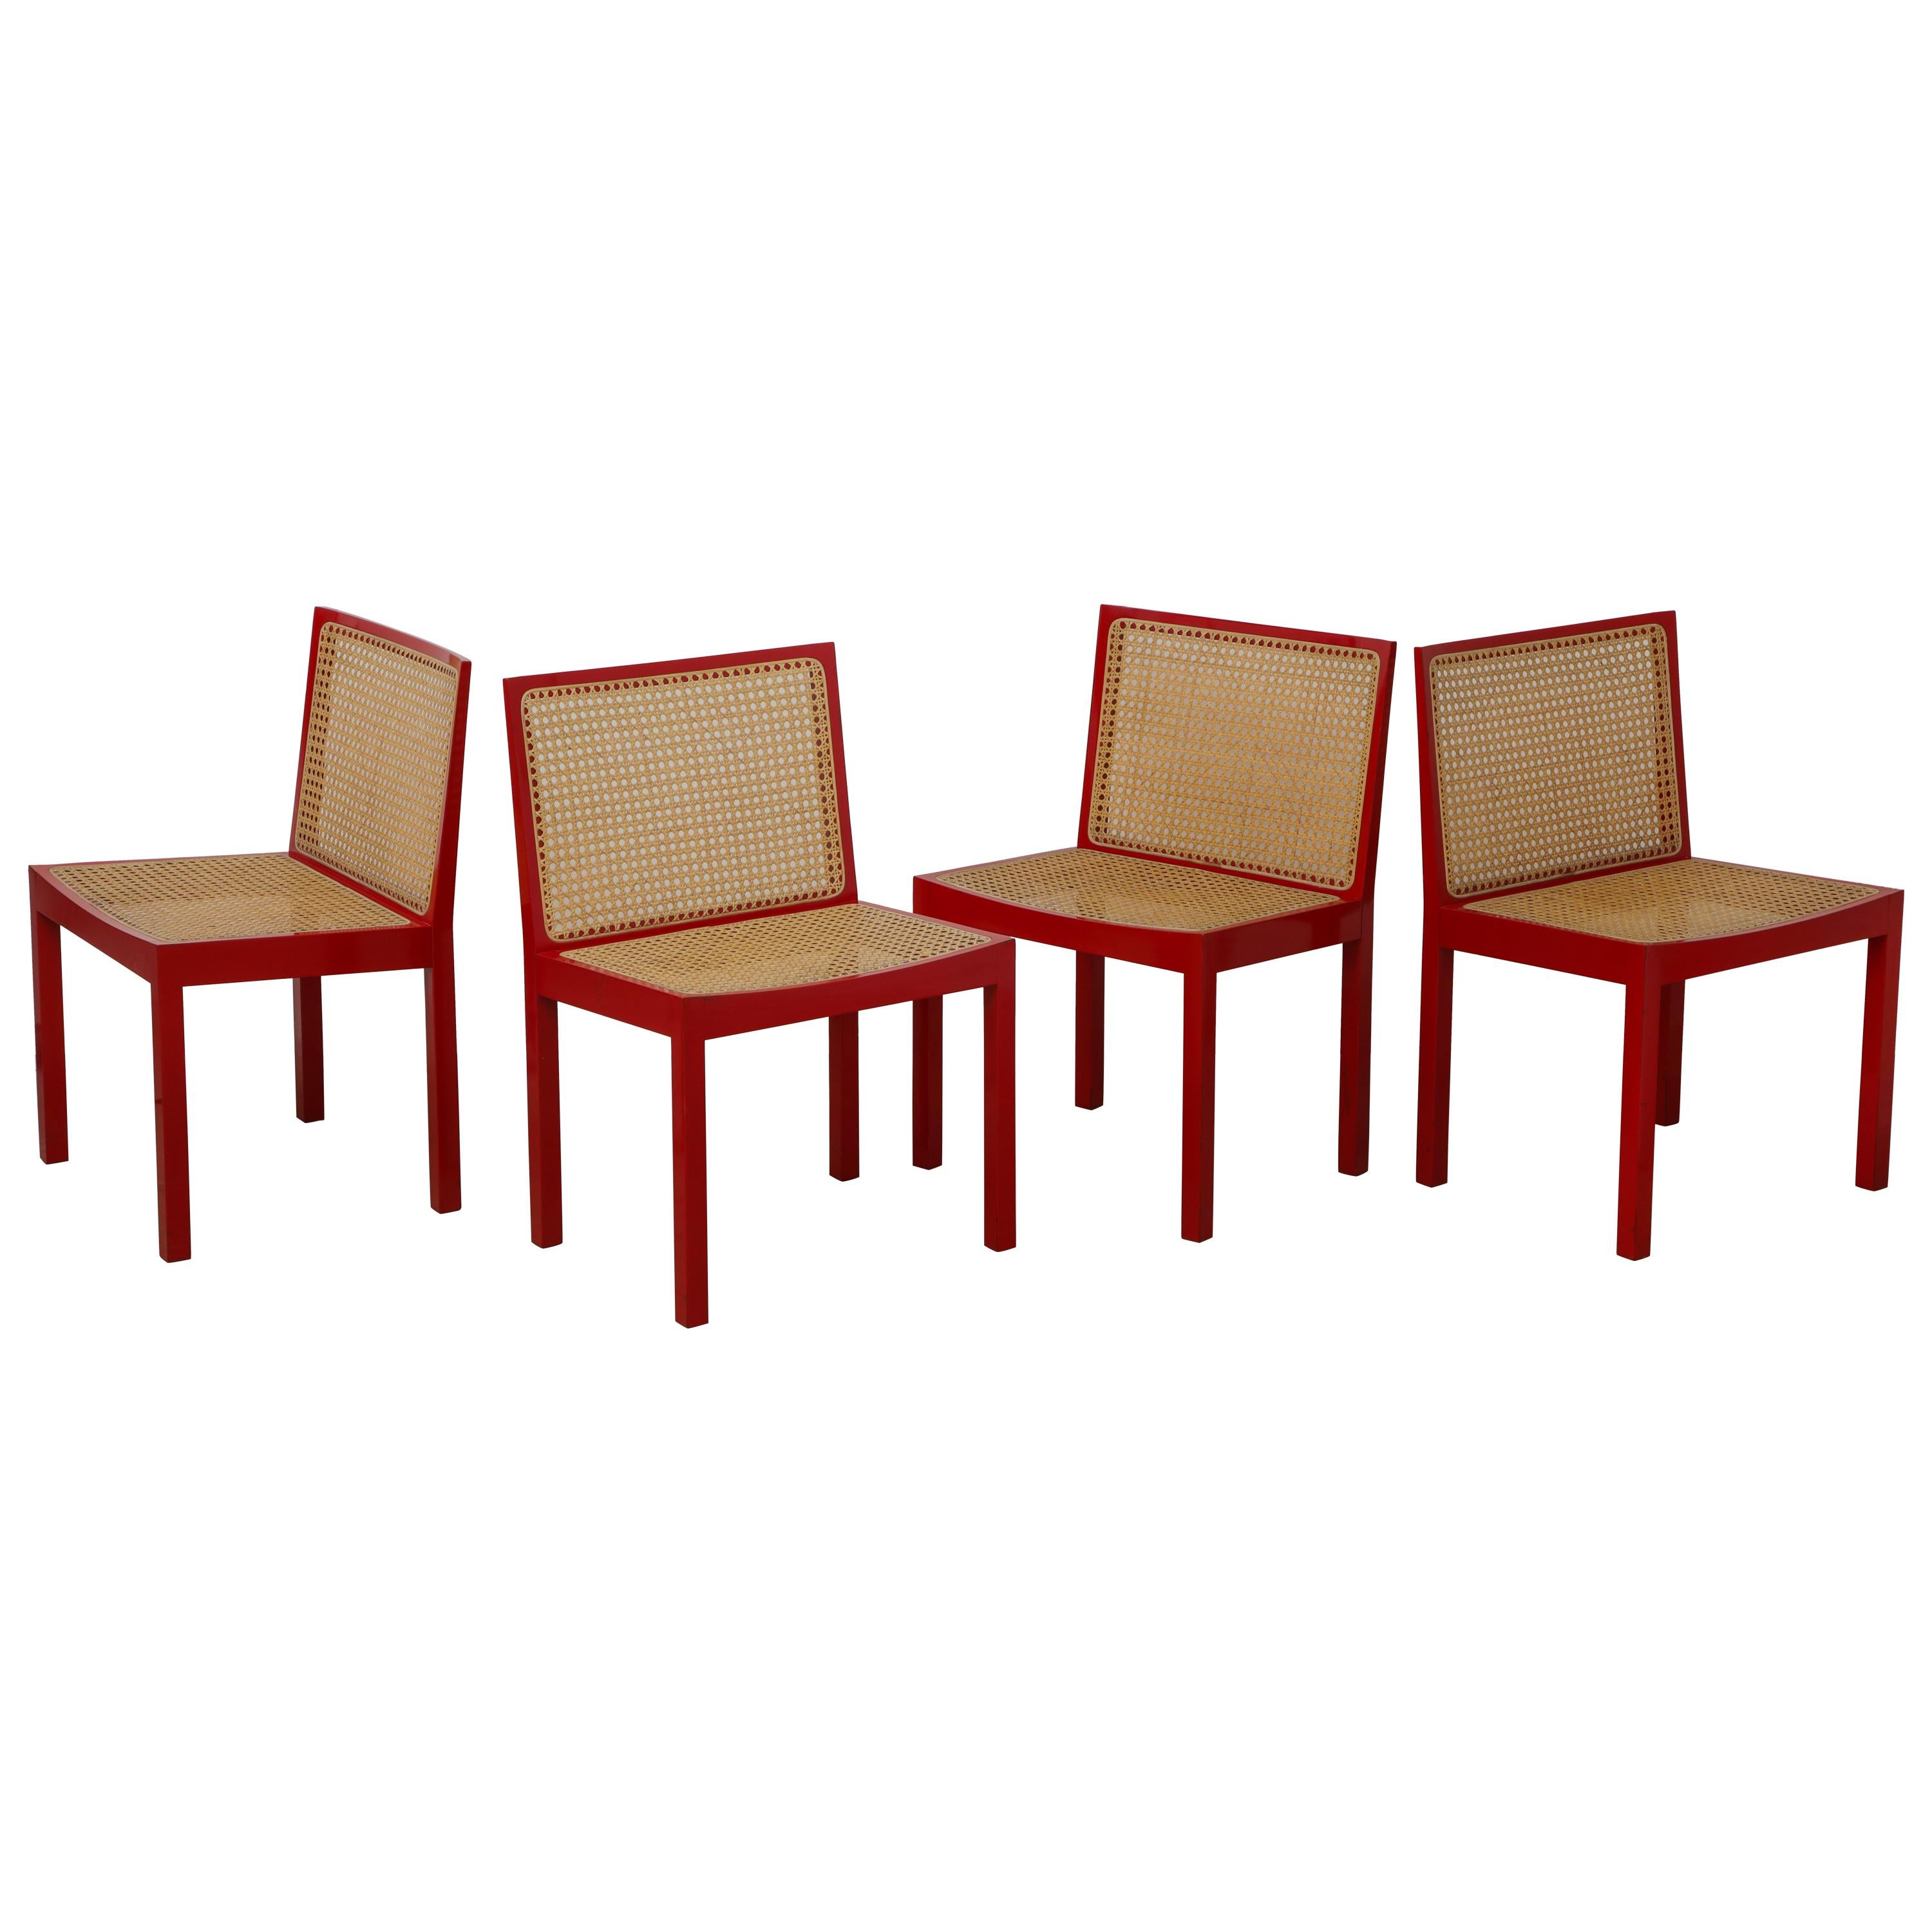 Set of Four Red Lacquer "Bankstuhl" Chairs by Willy Guhl for Stendig For Sale